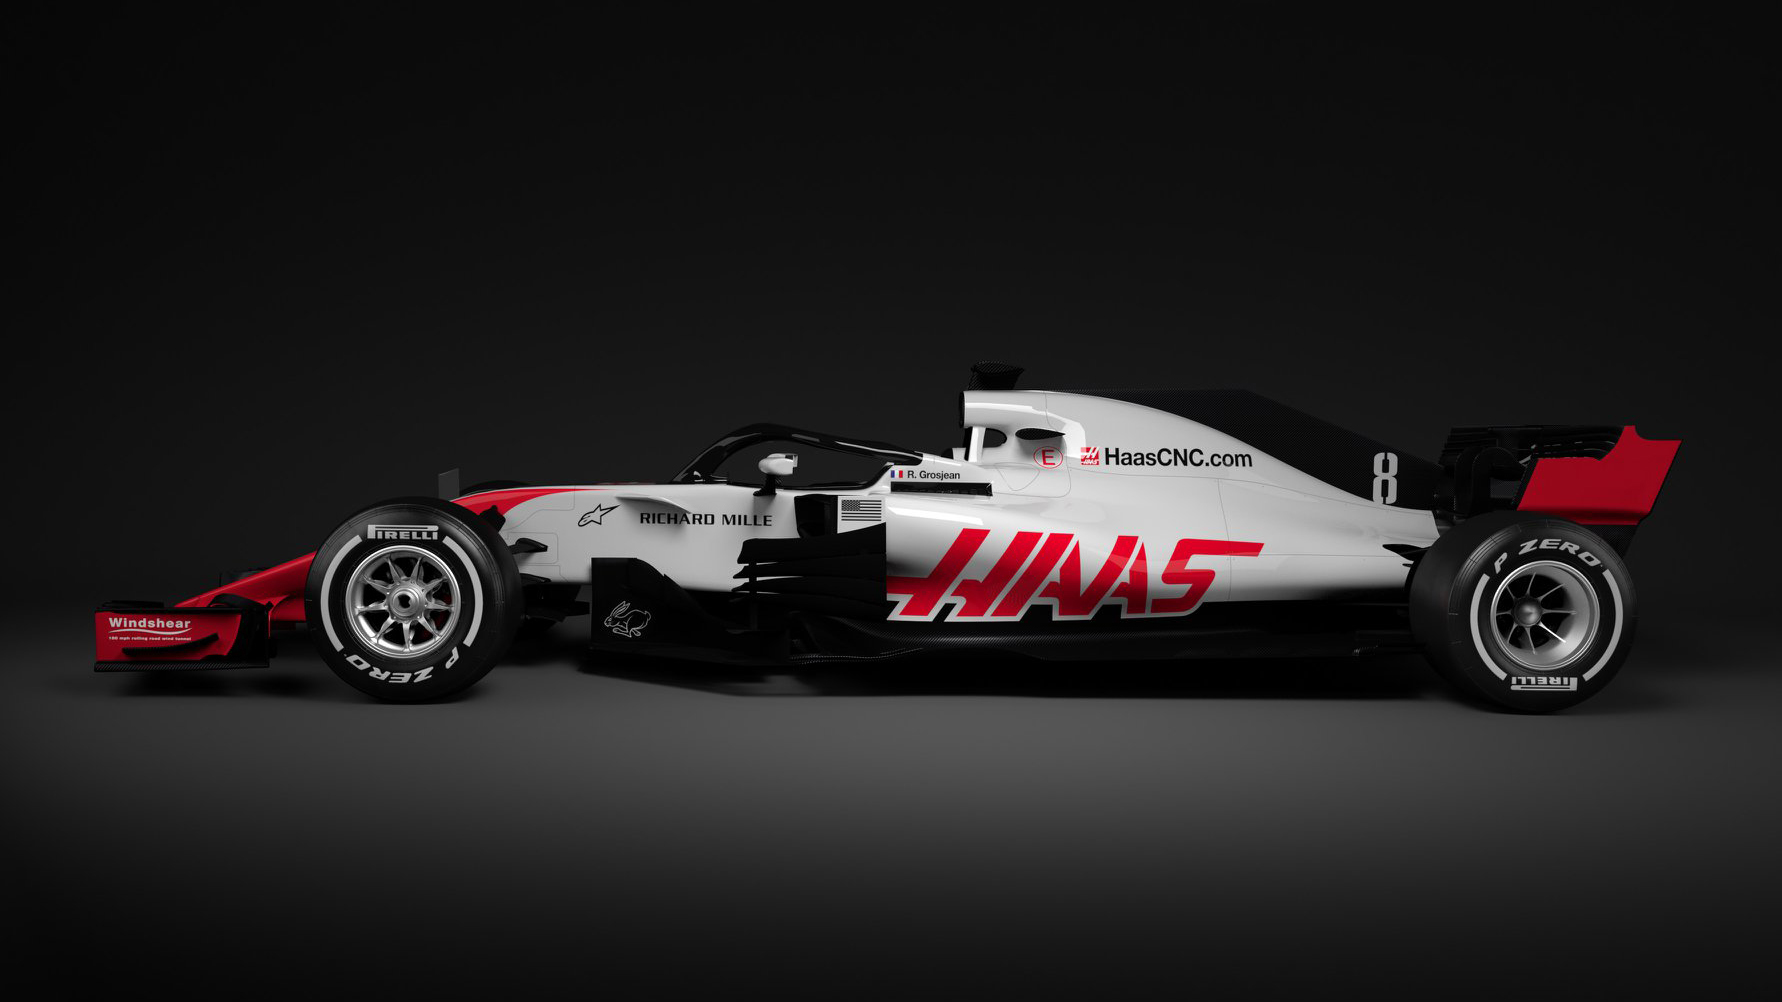 We get our first look at this year's halo-equipped Formula One cars ...